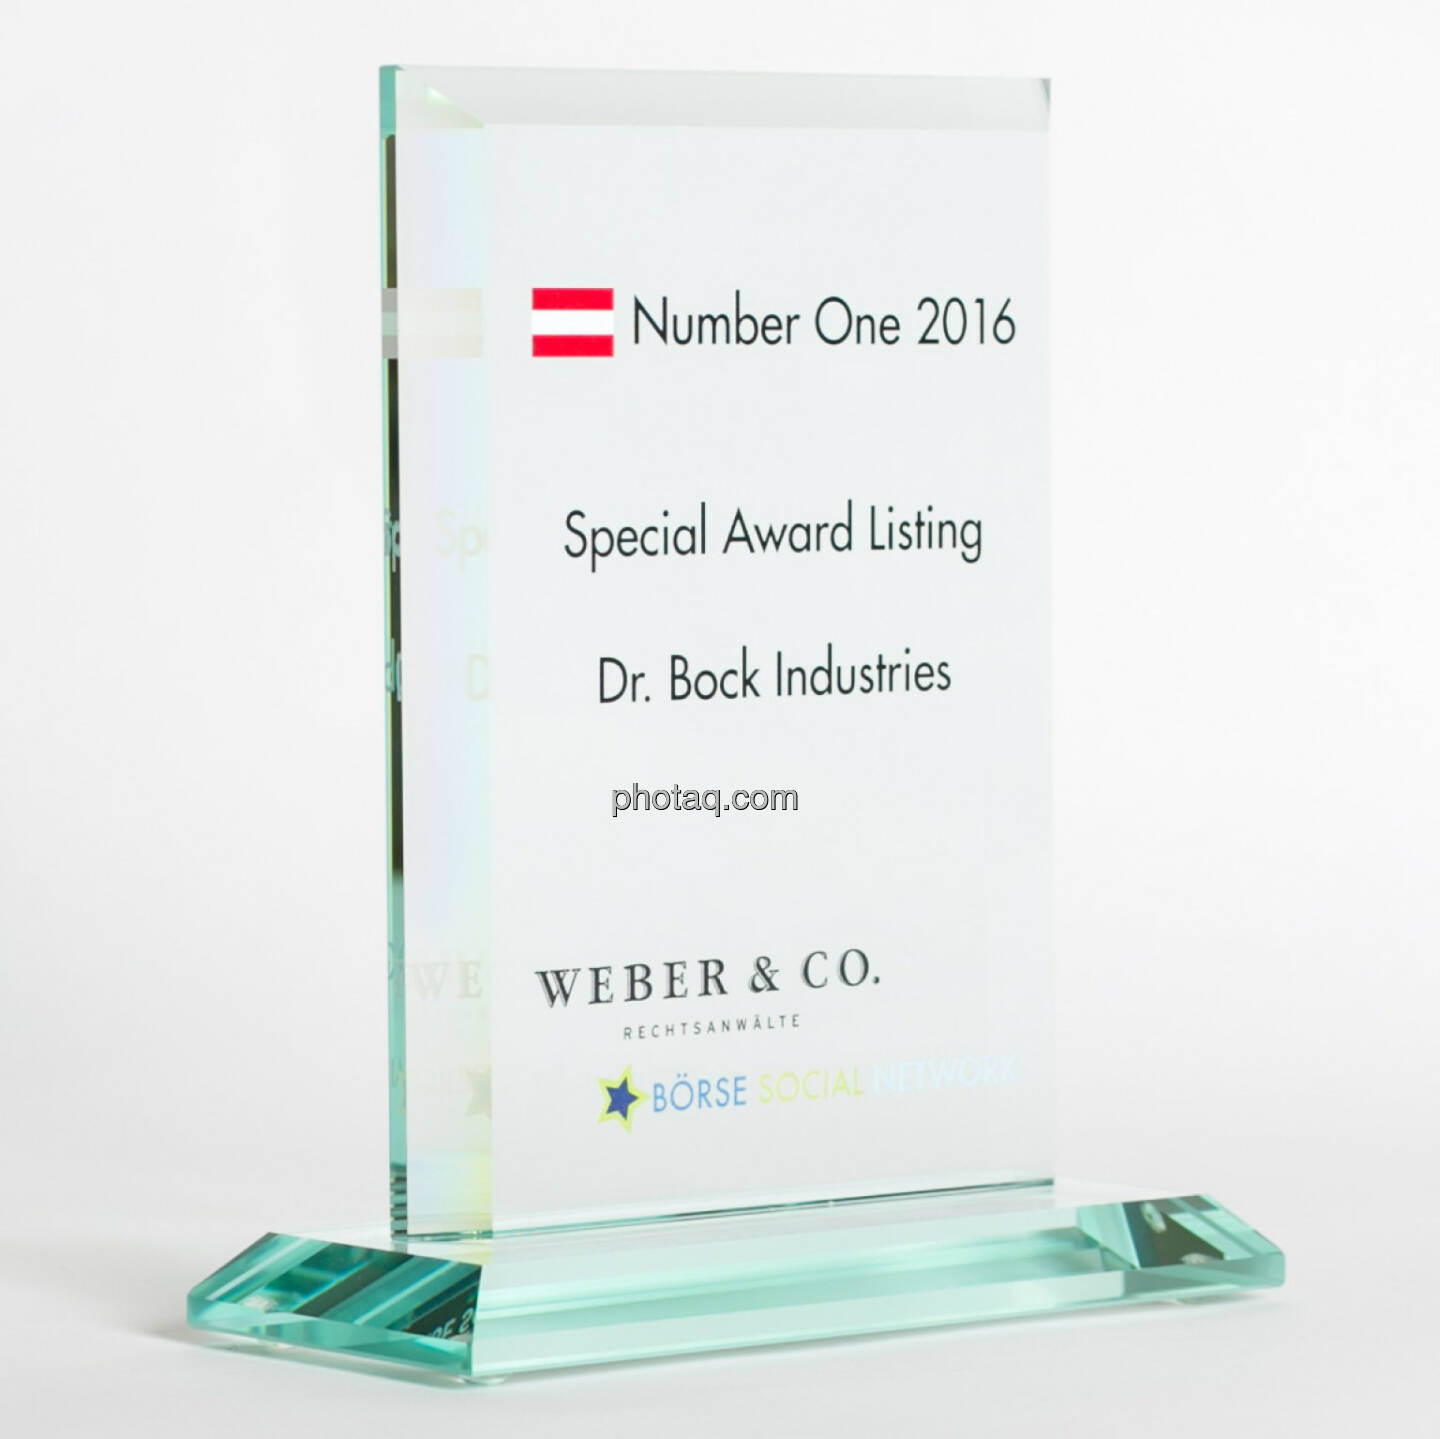 Number One Awards 2016 - Special Award Listing Dr. Bock Industries